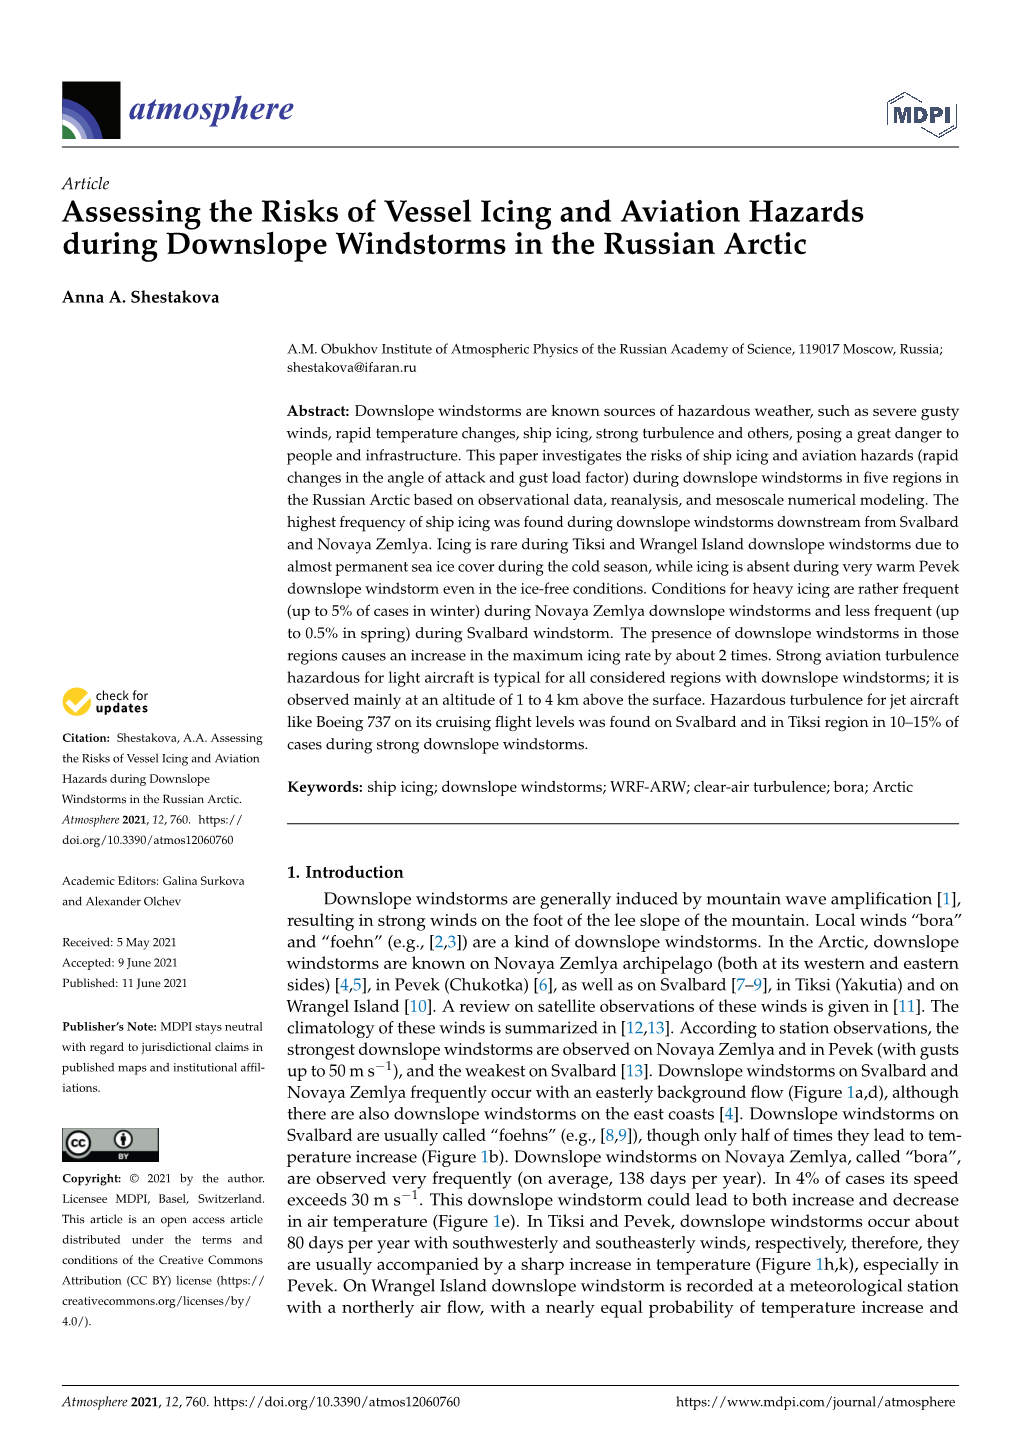 Assessing the Risks of Vessel Icing and Aviation Hazards During Downslope Windstorms in the Russian Arctic